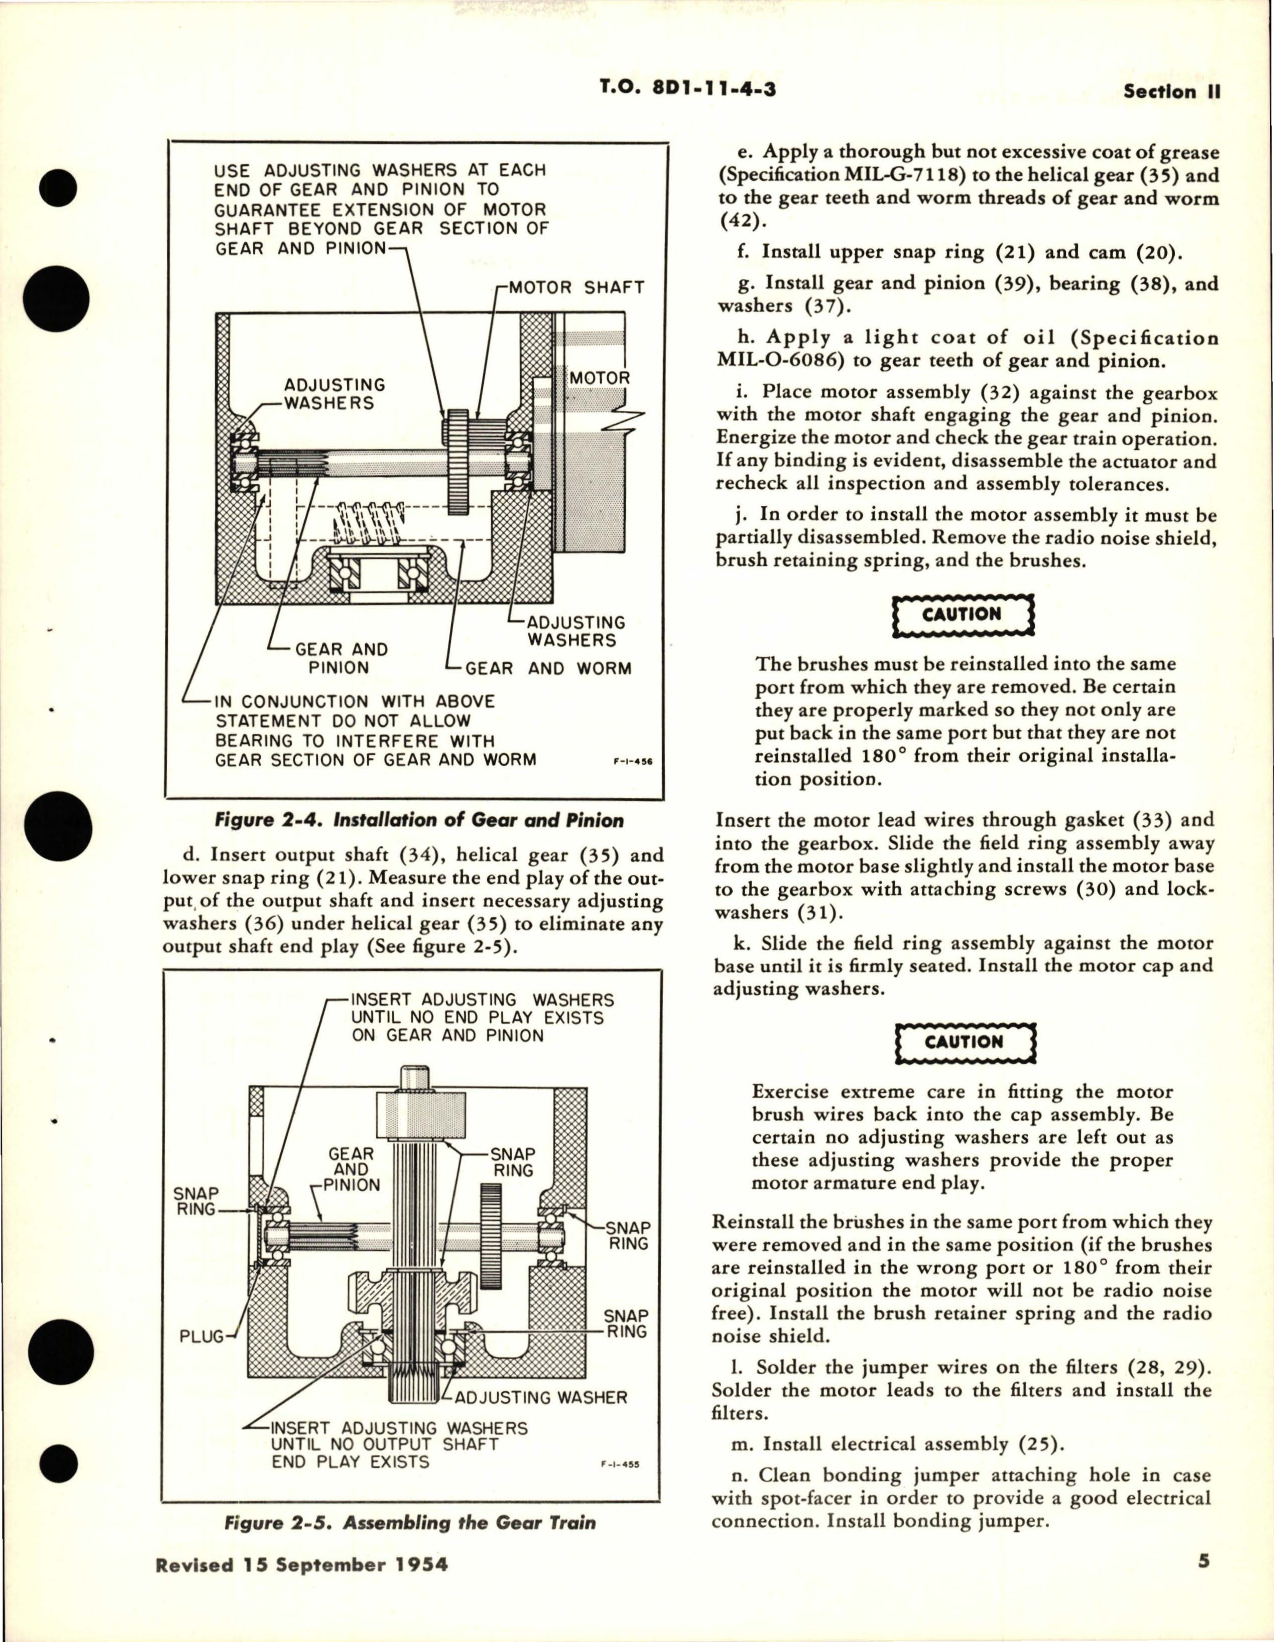 Sample page 9 from AirCorps Library document: Overhaul Instructions for Electro-Mechanical Torque Actuators 